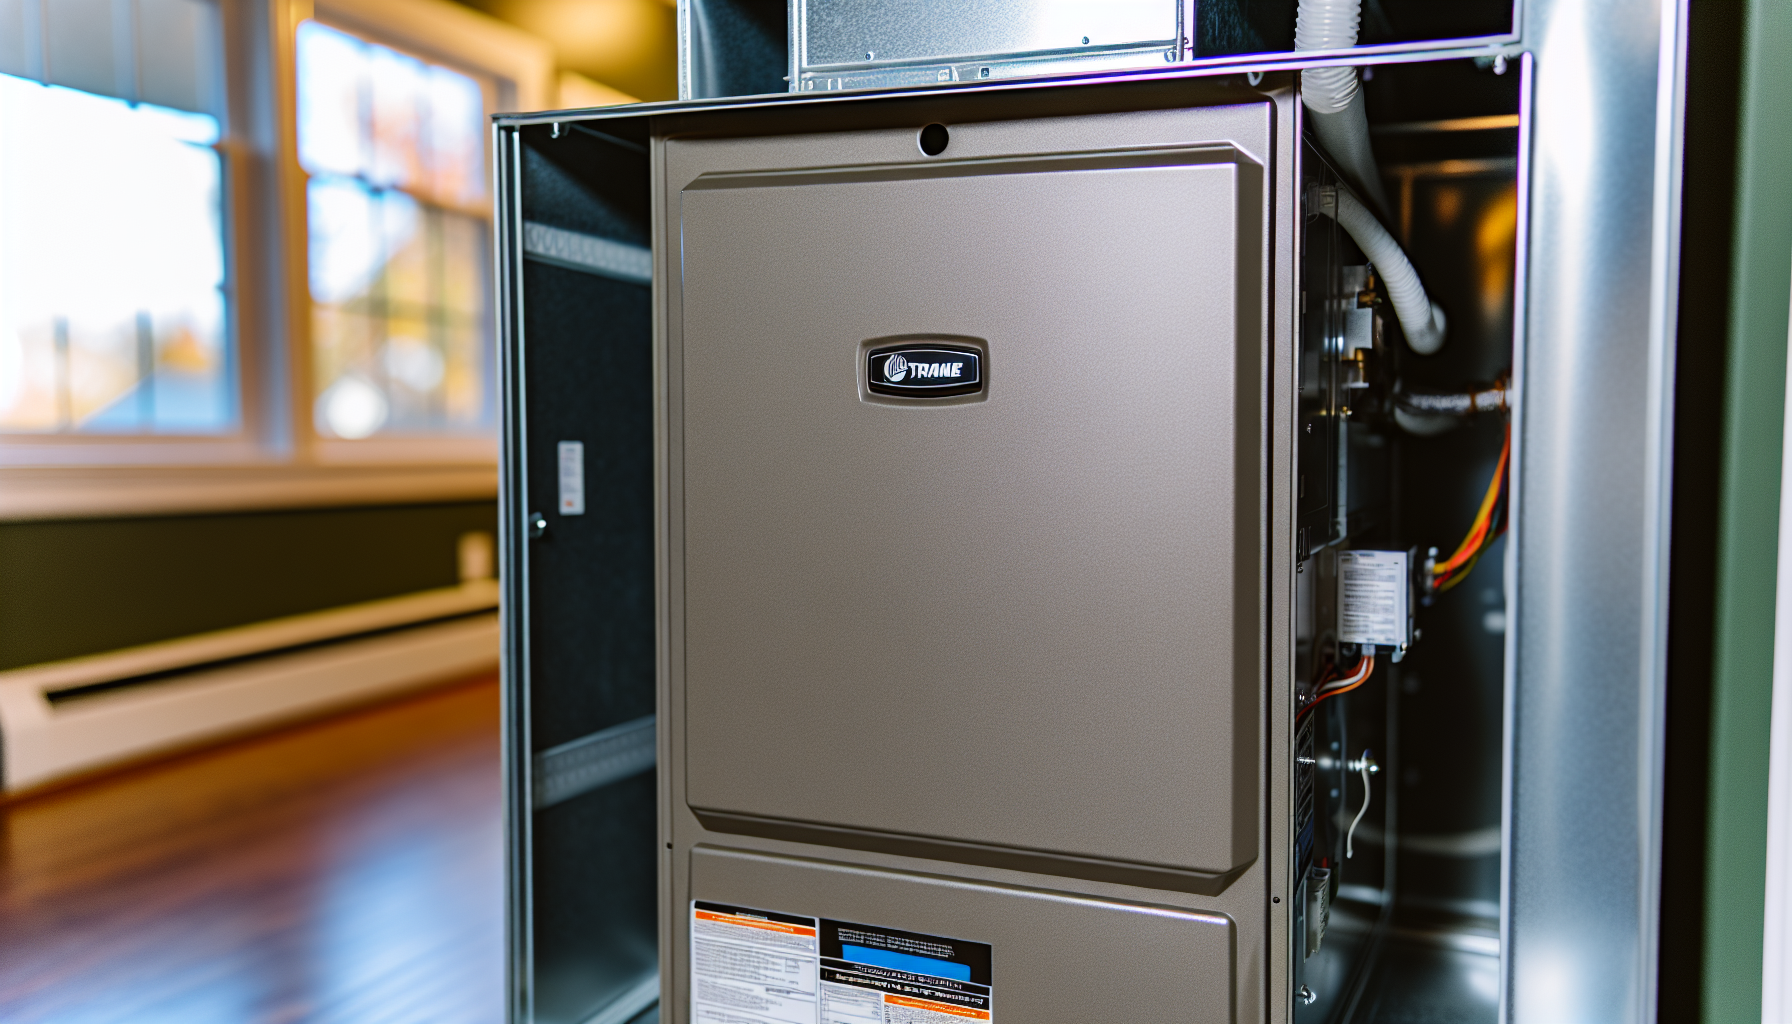 Durable cabinet of Trane S9X2 furnace